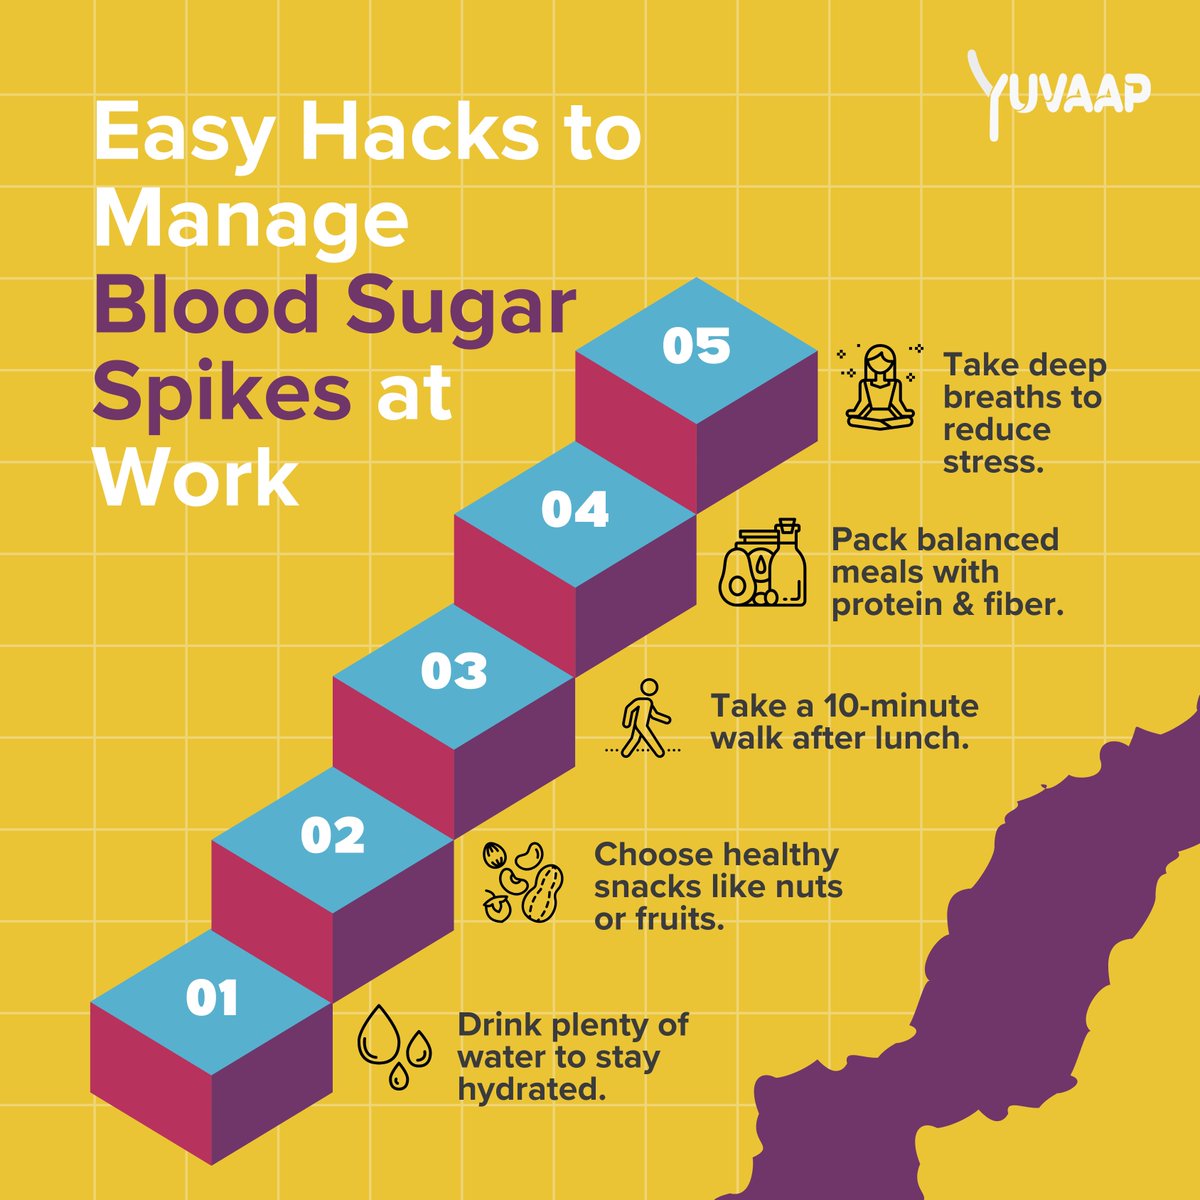 Boost your energy and stay productive at work by incorporating these simple hacks to balance your blood sugar levels. 

Take a quick 10-minute walk post-lunch and sneak in some calf raises for an added energy.

#EnergyBoost #ProductivityTips #BloodSugarControl #HealthyWorkplace…